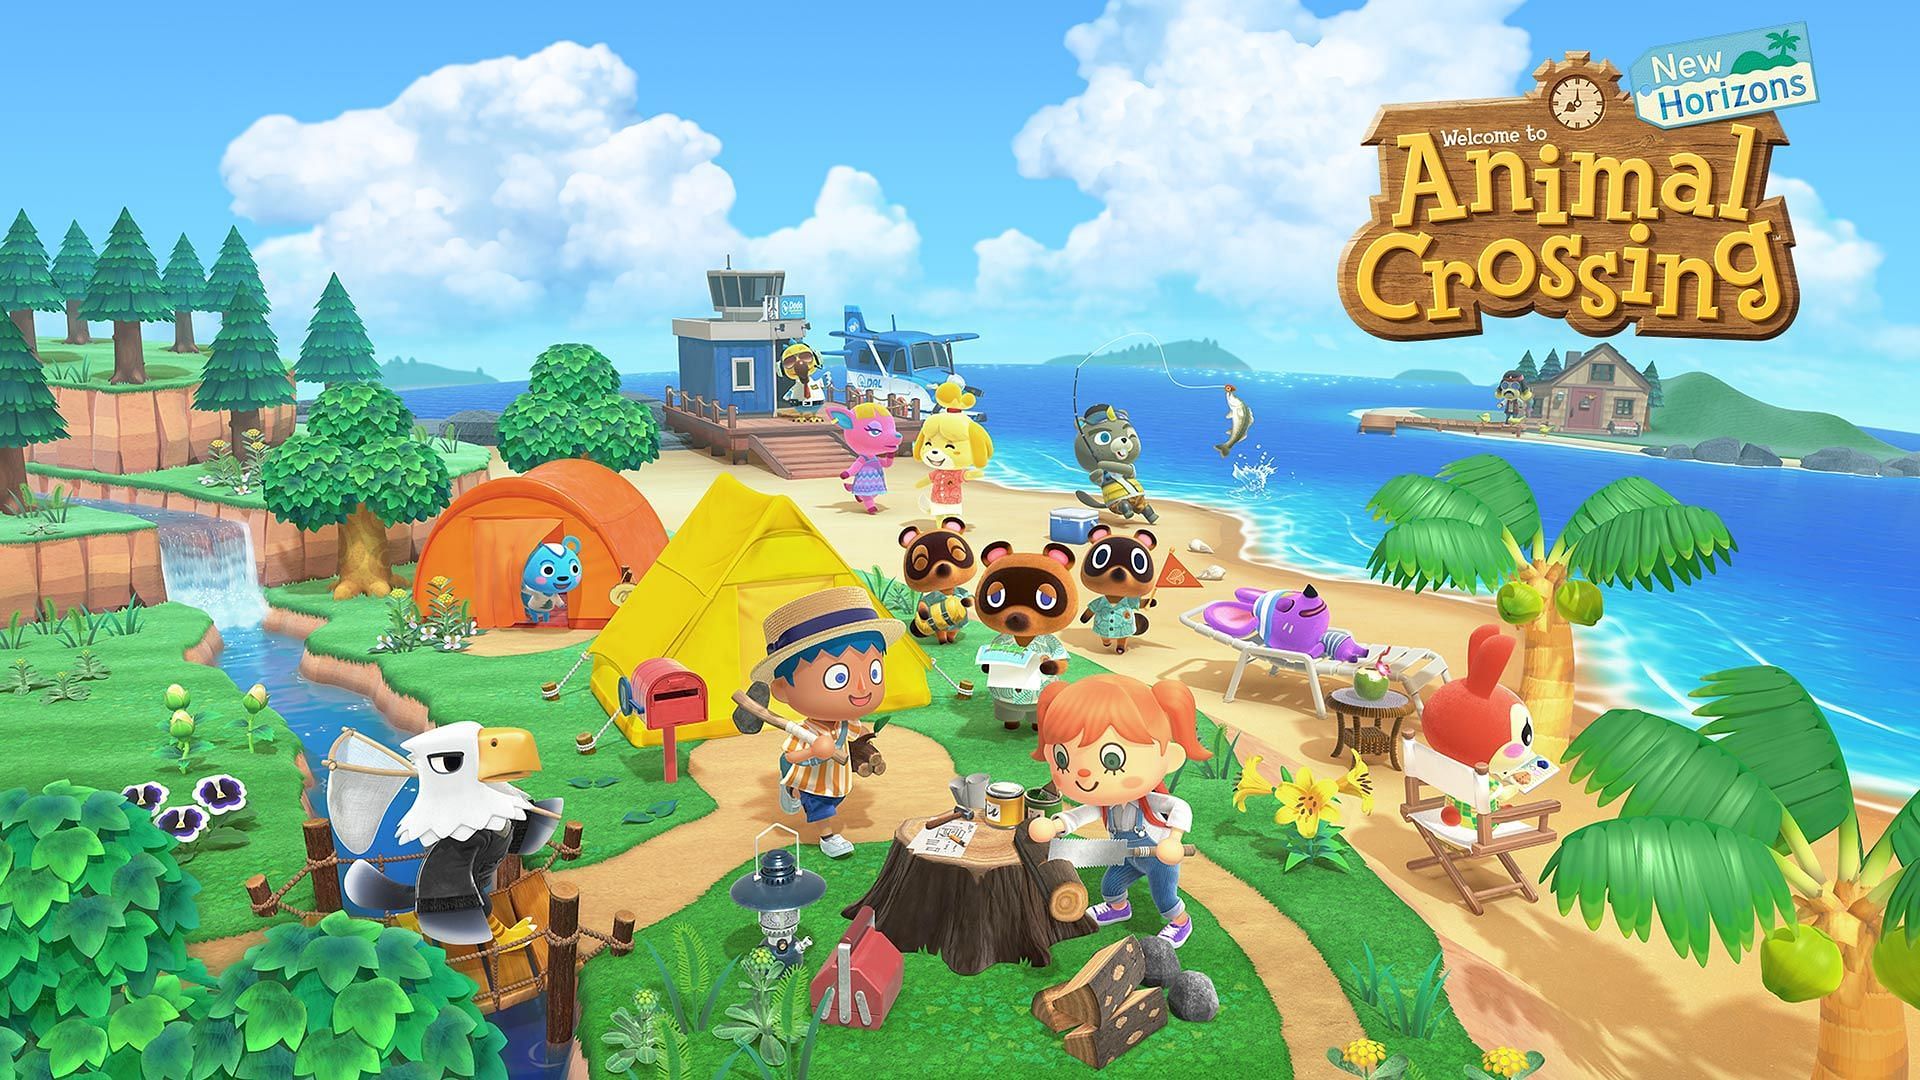 There are several games like Animal Crossing: New Horizons that players can enjoy (Image via SFGATE)